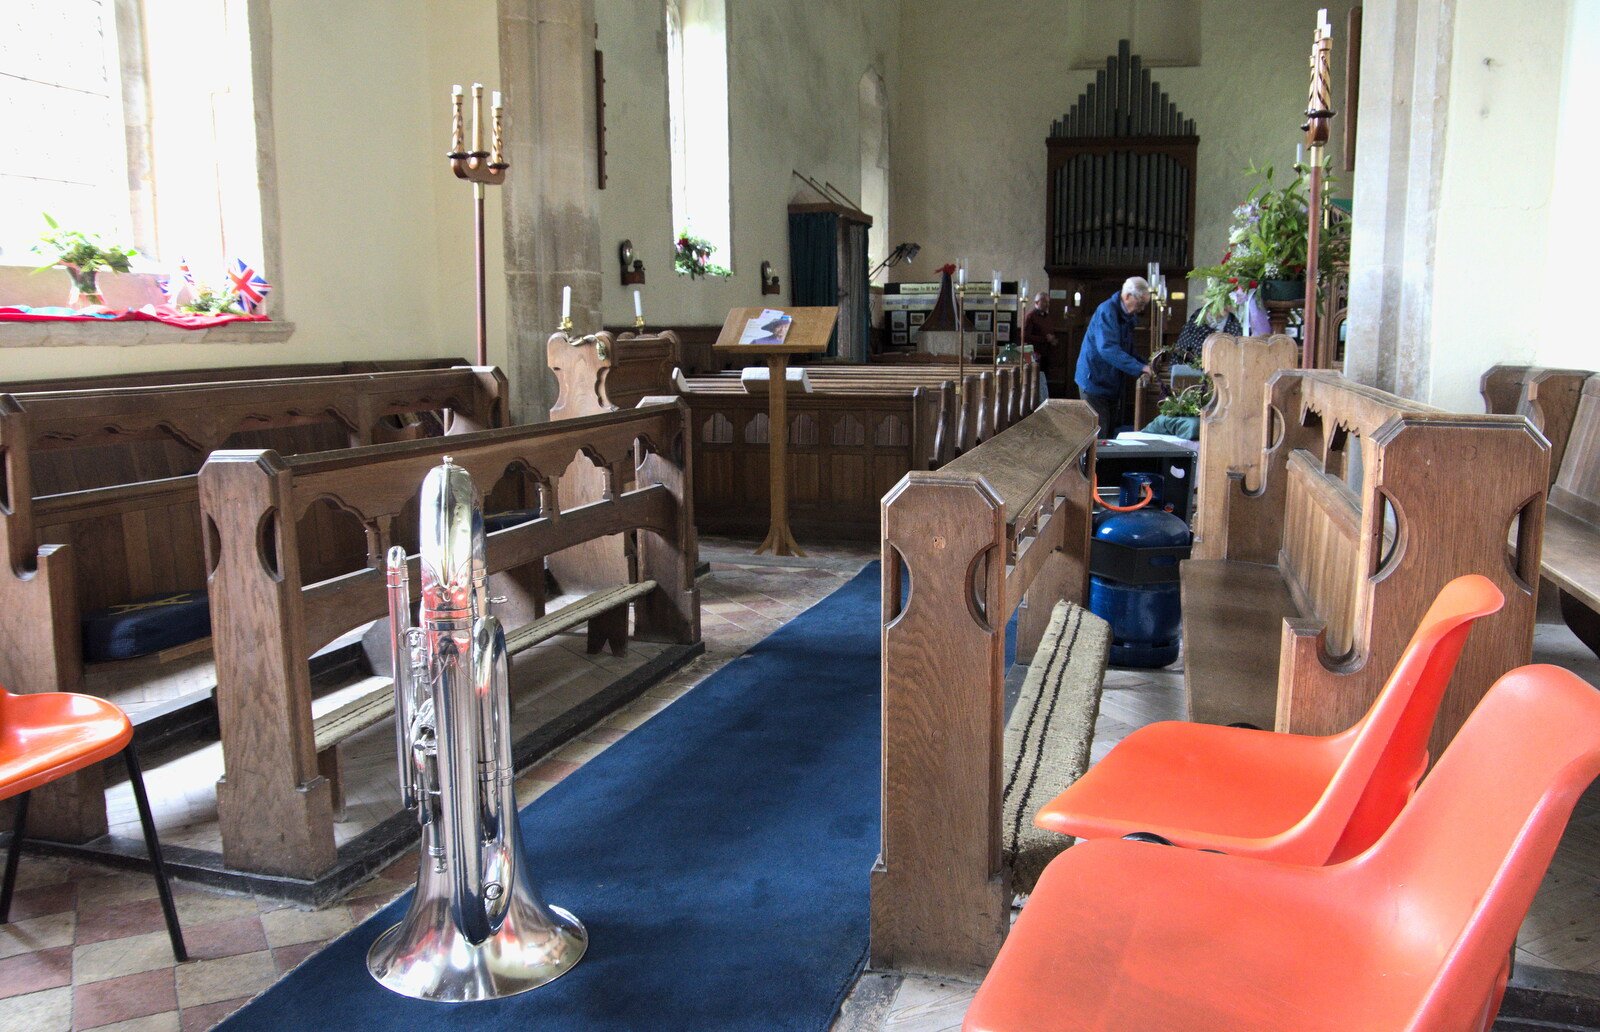 Platinum Jubilee Sunday in Palgrave, Brome and Coney Weston - 5th June 2022: Julian's E♭ Bass waits in the aisle 